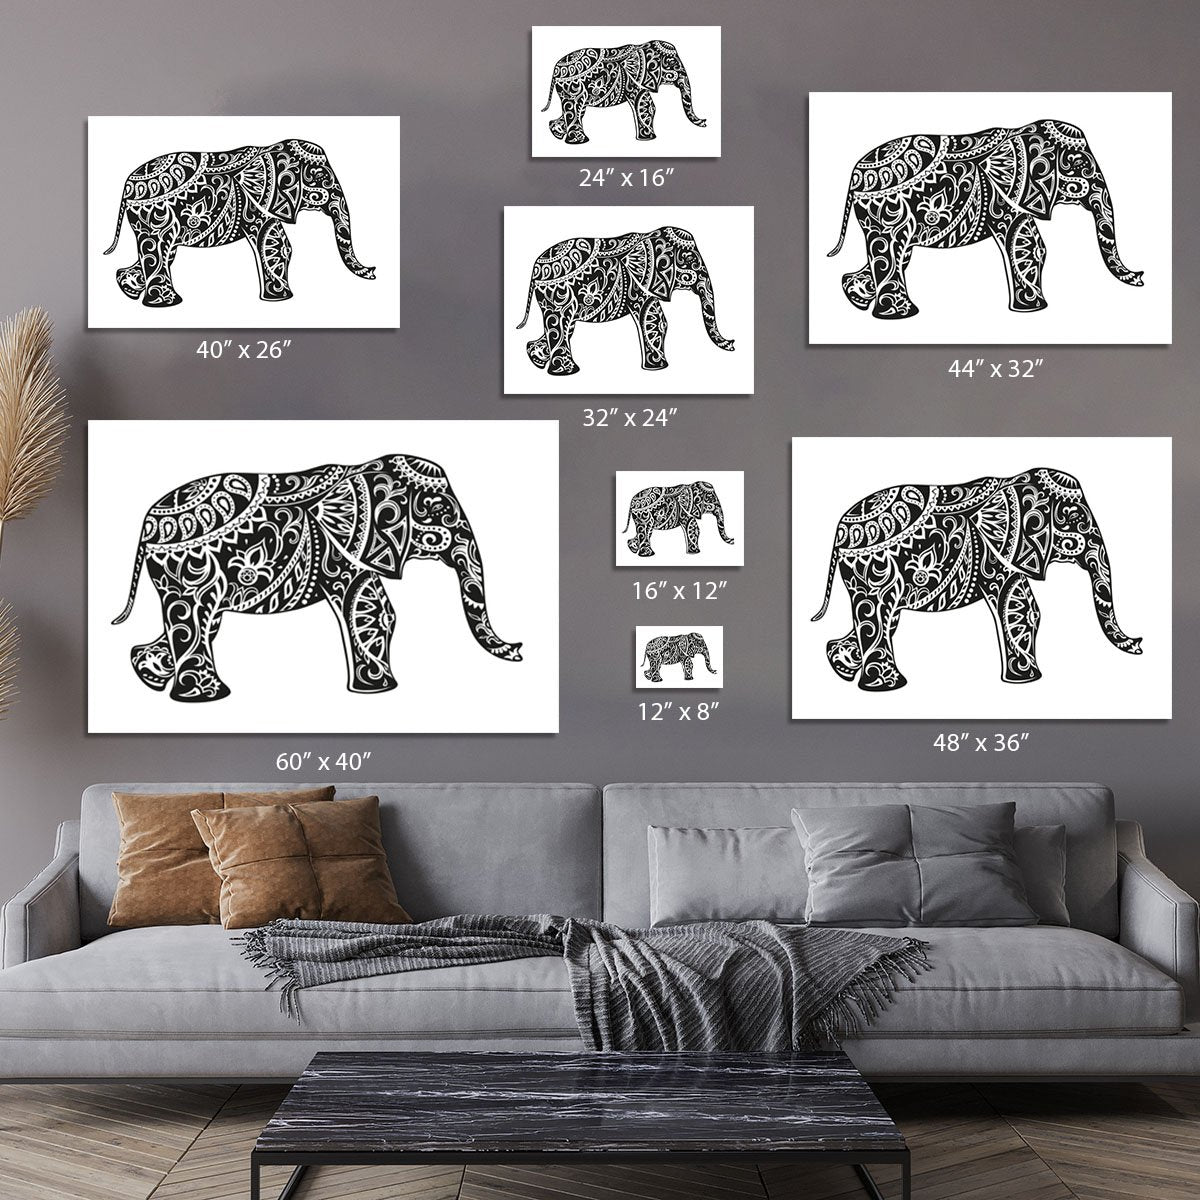 The stylized figure of an elephant in the festive patterns Canvas Print or Poster